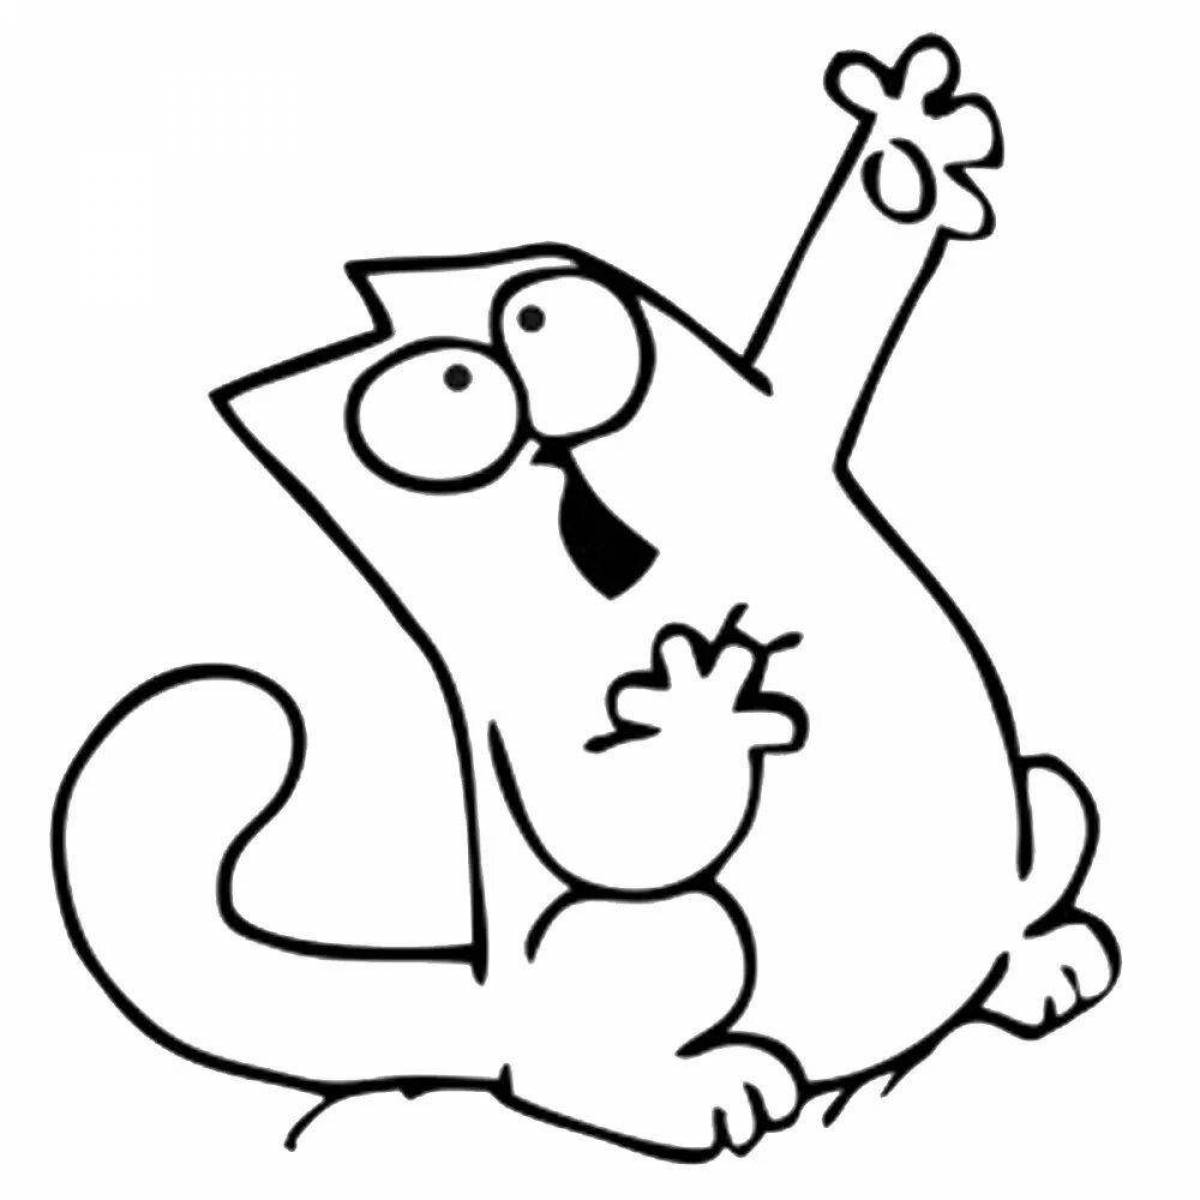 Silly funny cat coloring pages